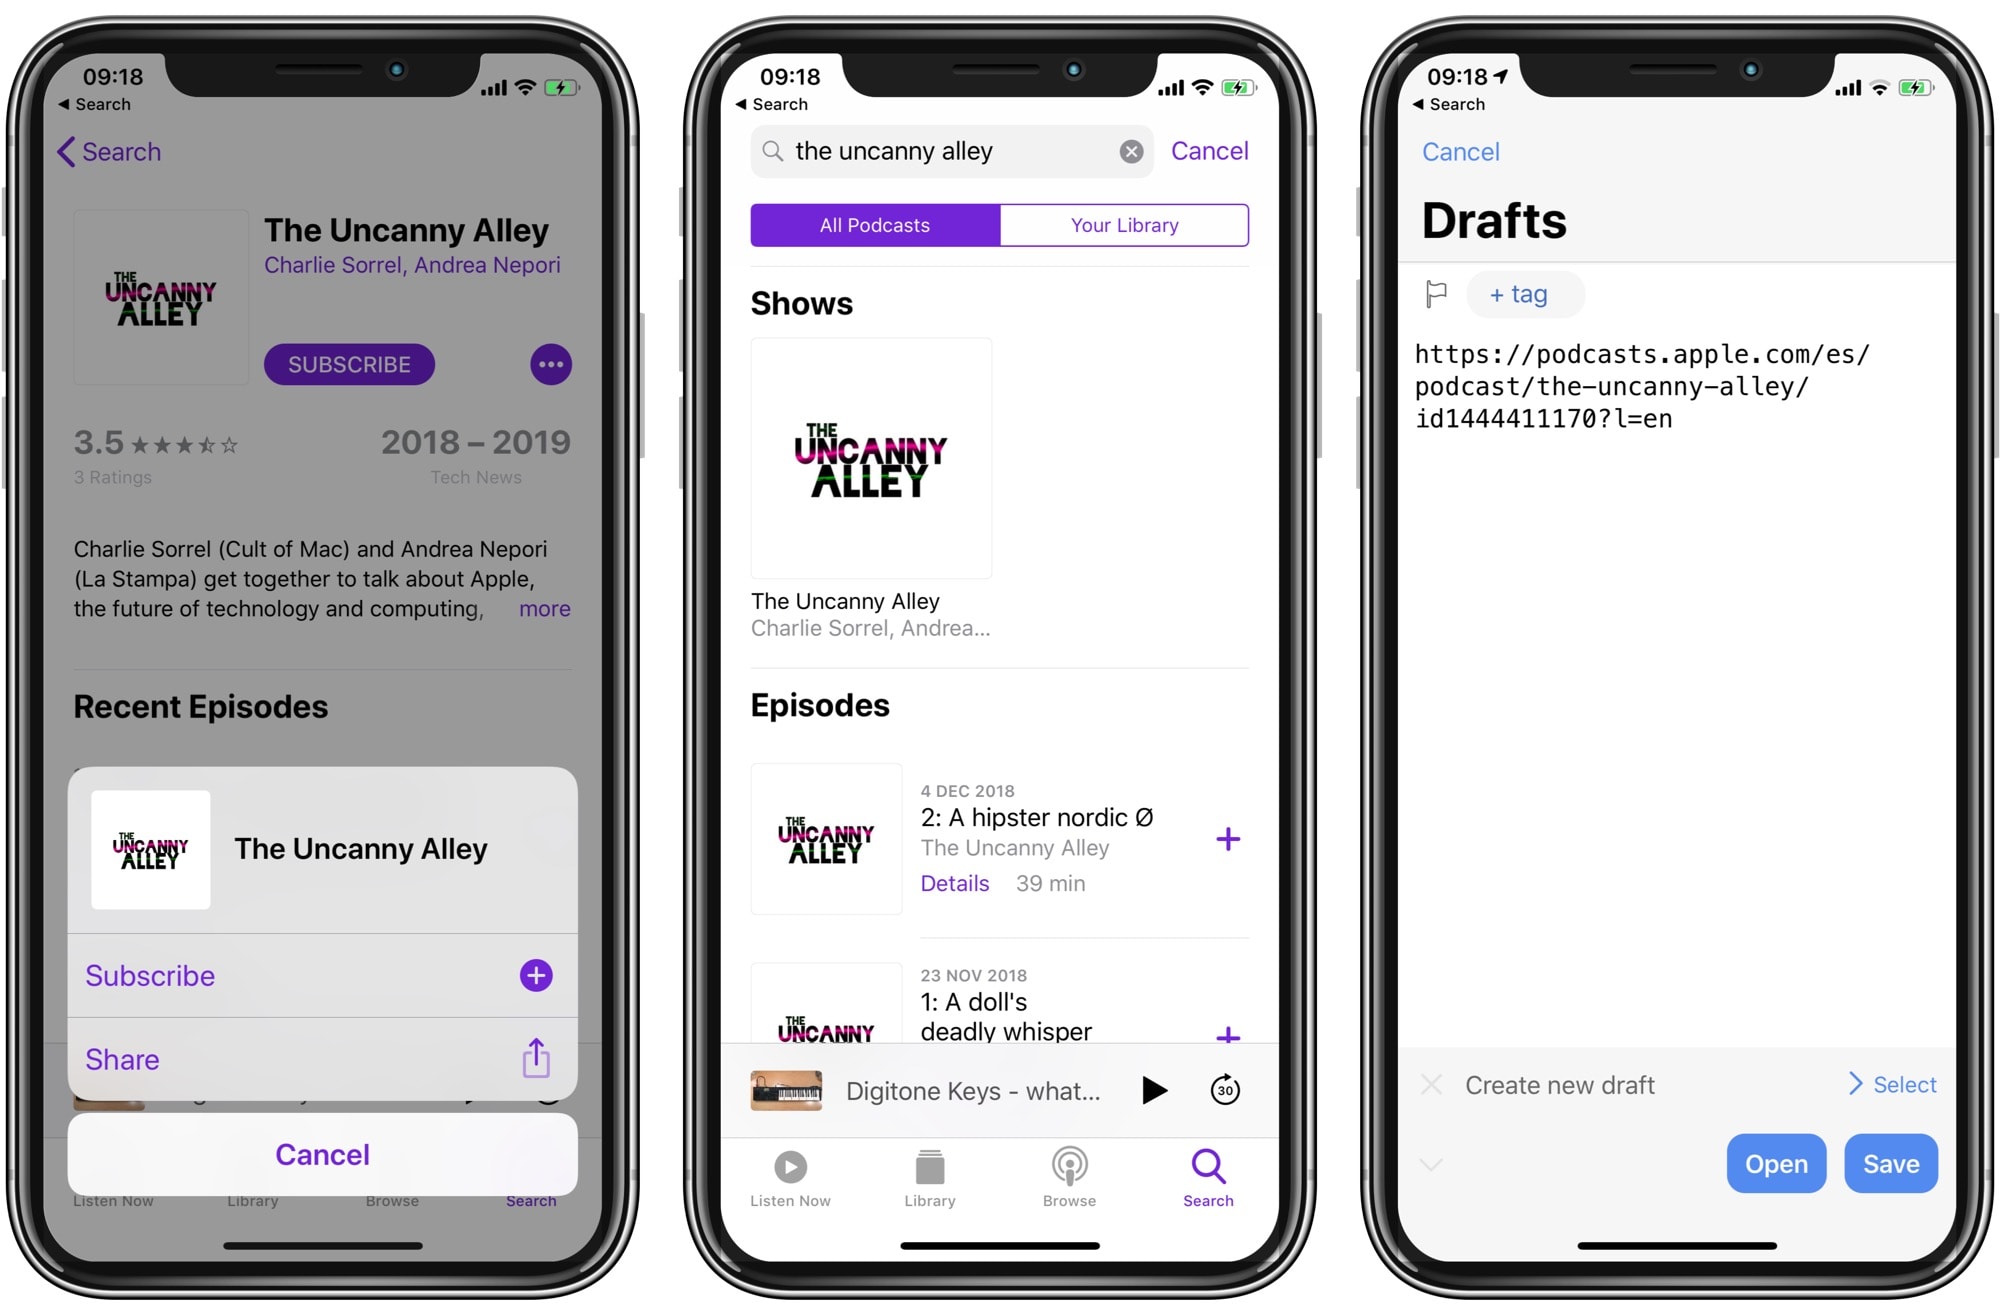 You can grab a podcast feed right from Apple’s directory, using the Podcasts app.